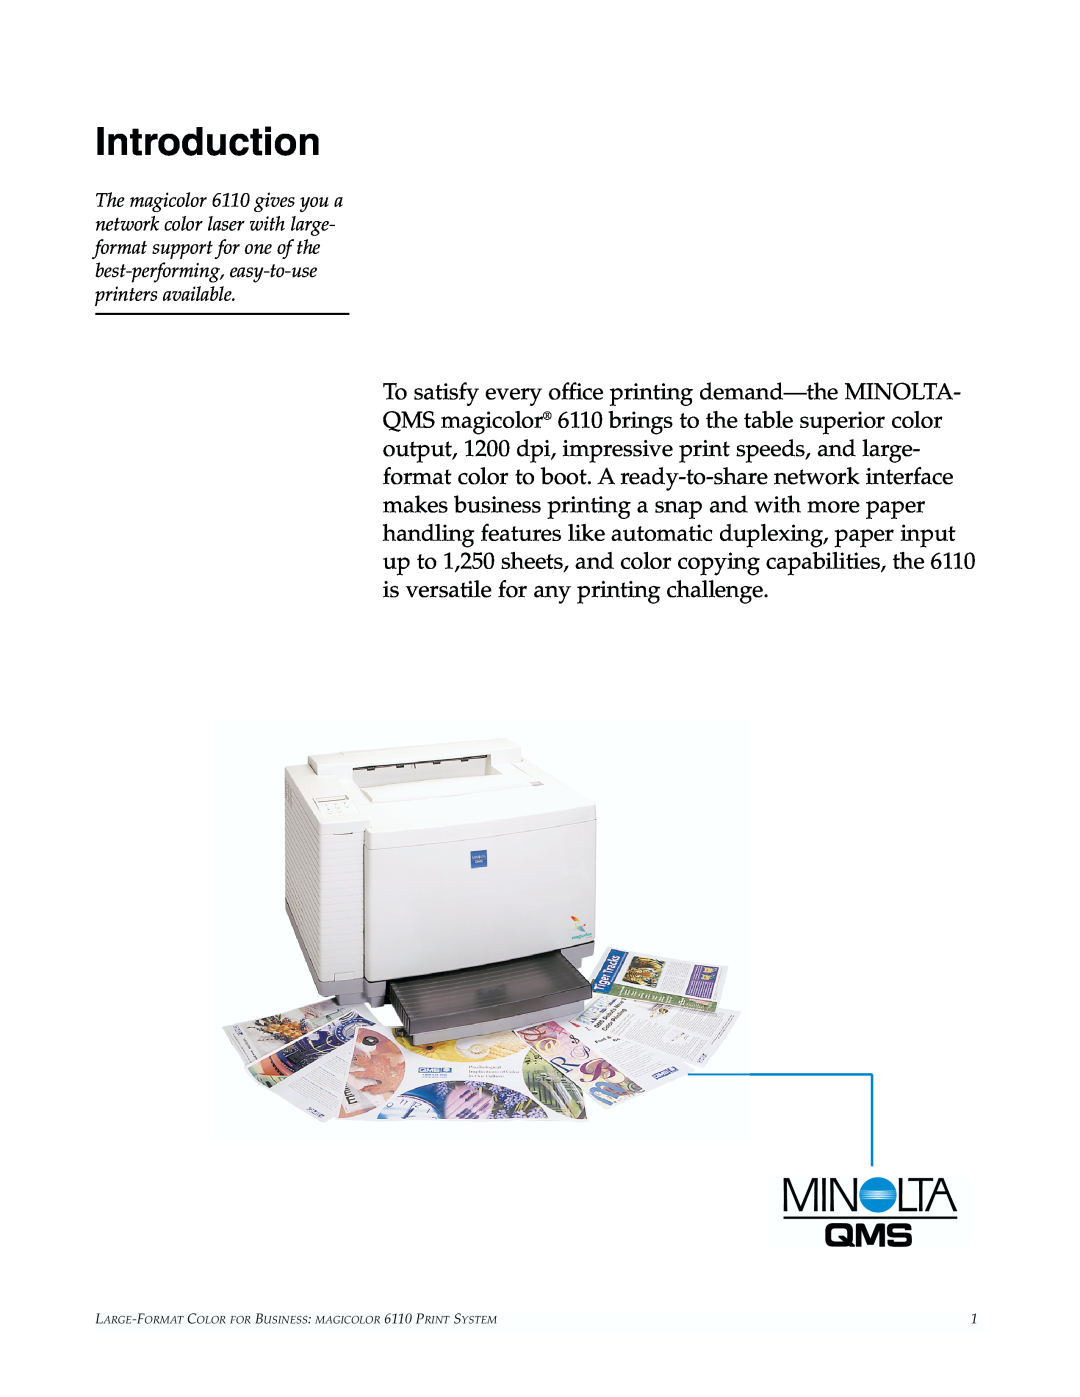 Minolta manual Introduction, LARGE-FORMAT COLOR FOR BUSINESS MAGICOLOR 6110 PRINT SYSTEM 